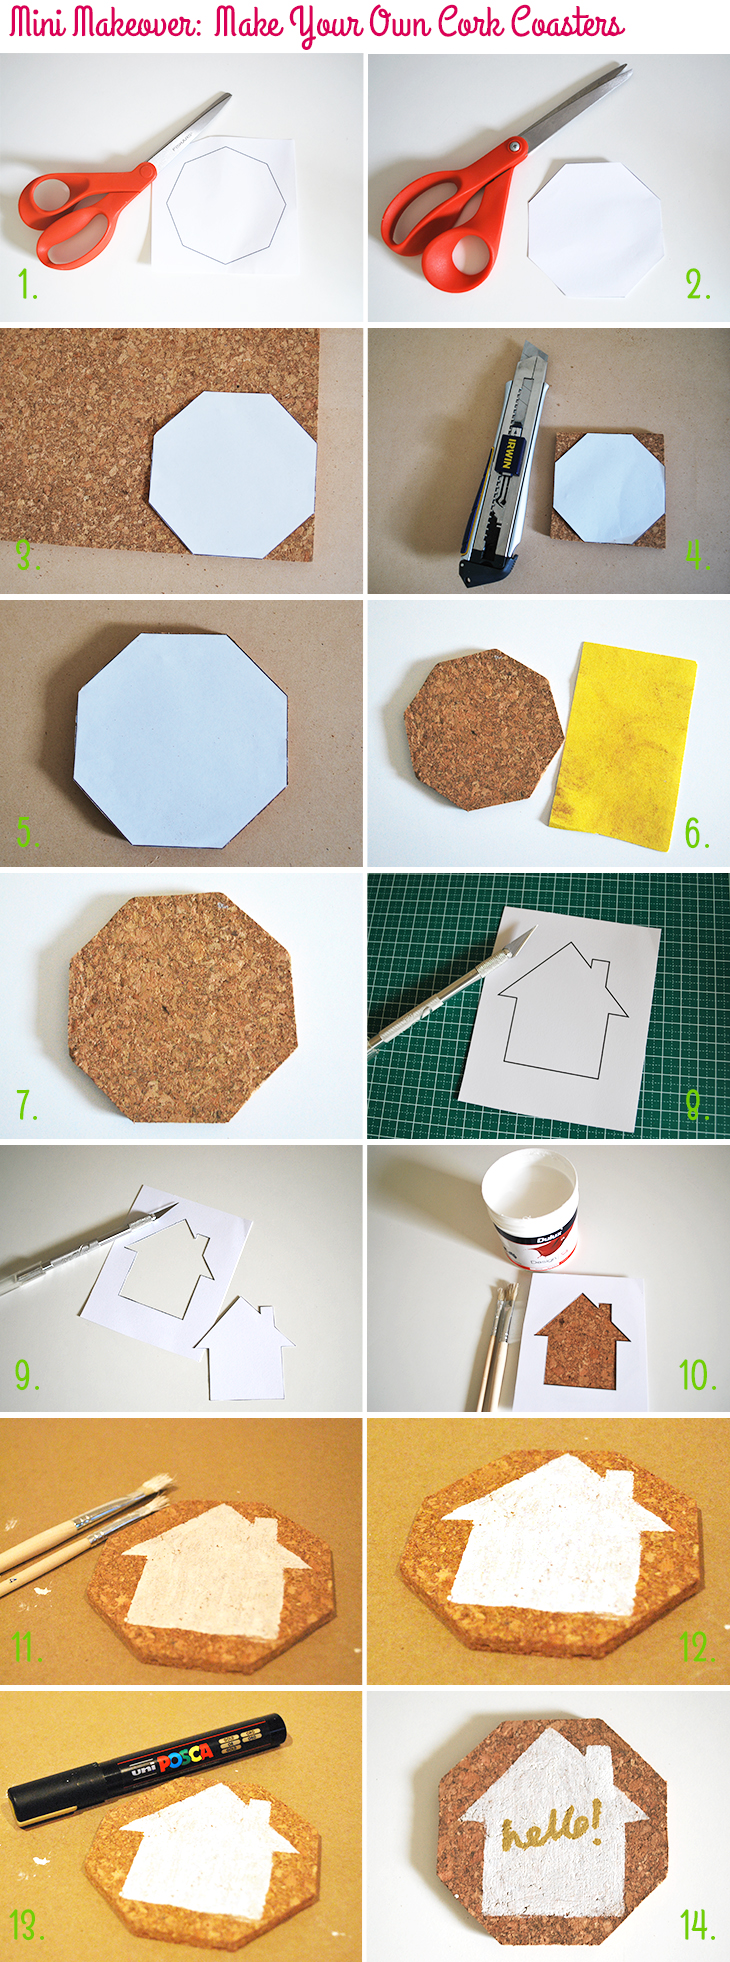 Mini Makeover: Make Your Own Cork Coasters (step by step) on Style for a Happy Home